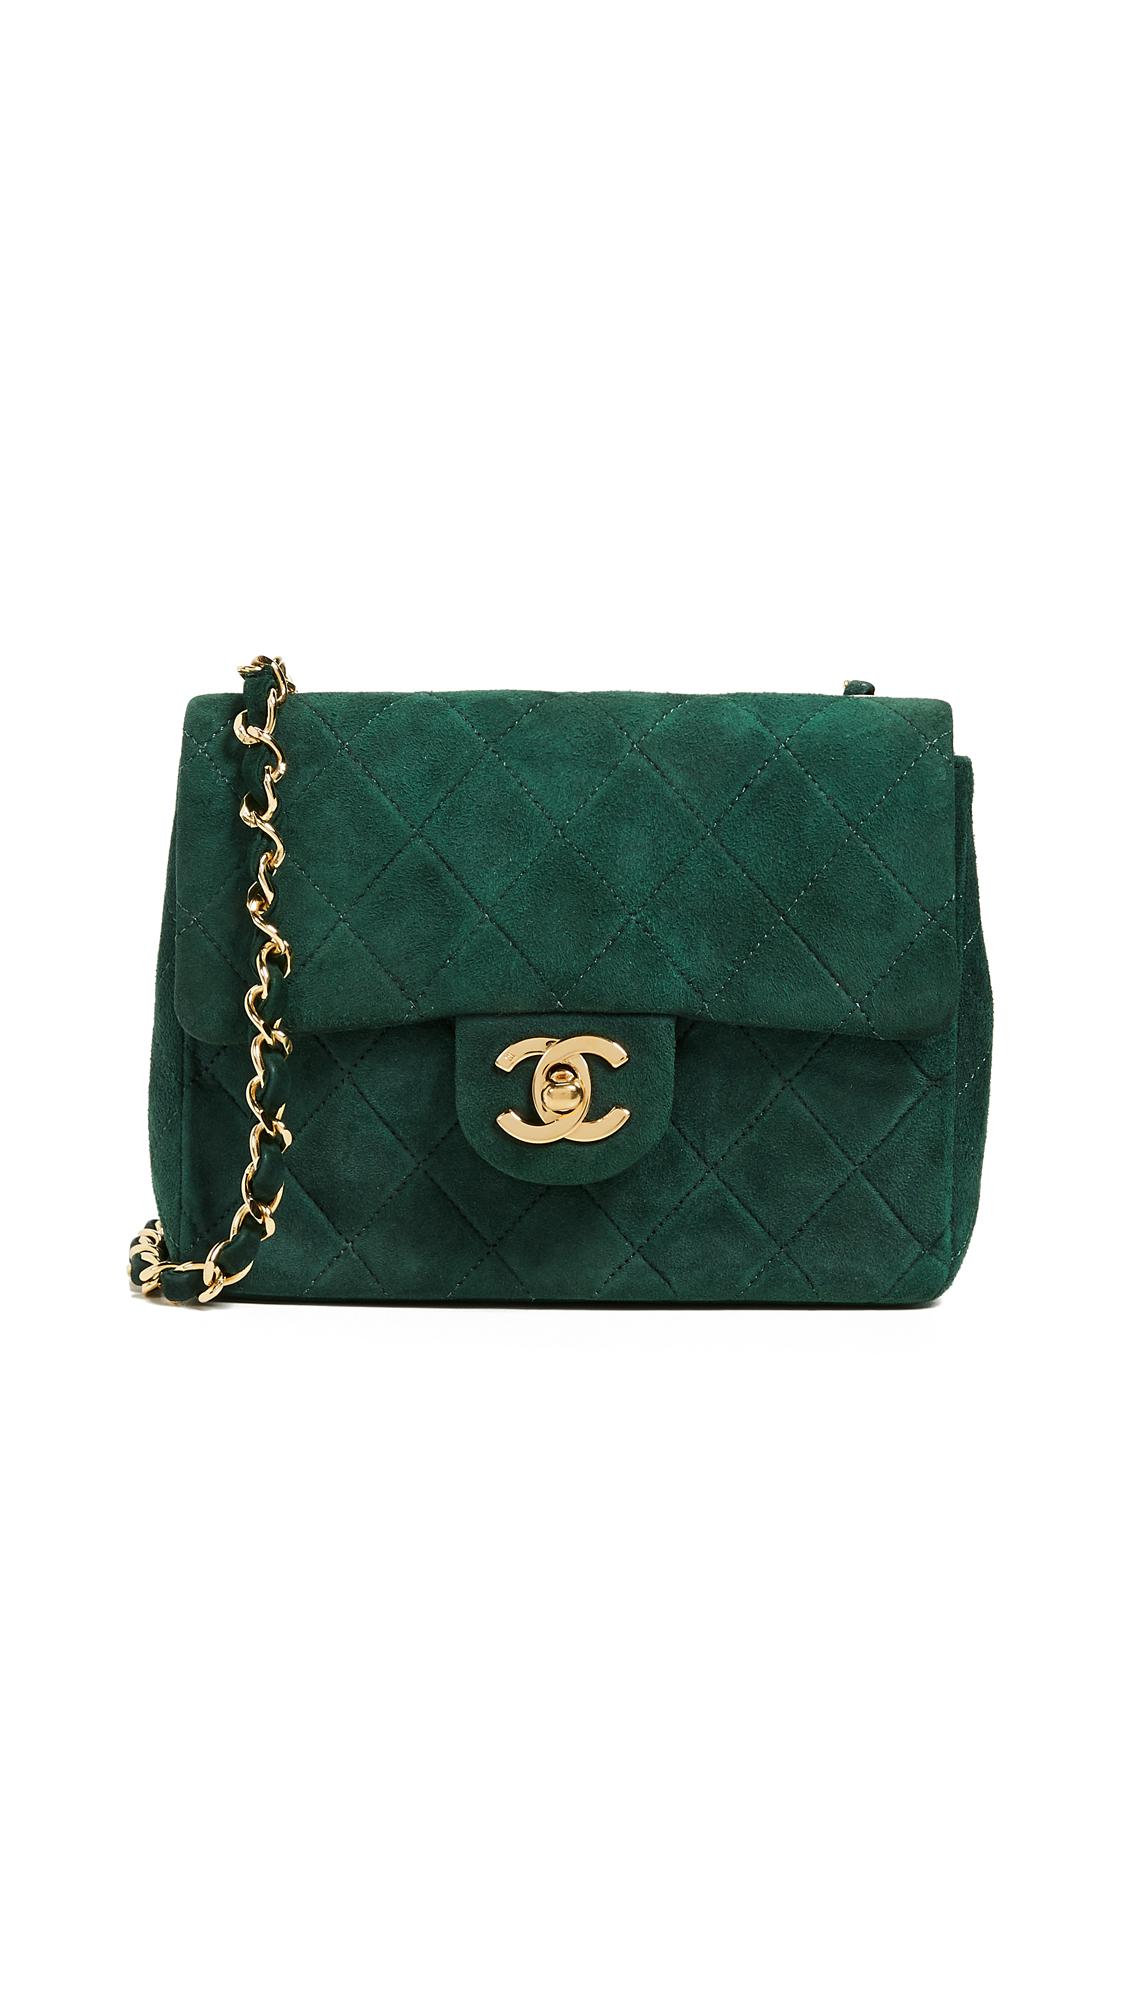 What Goes Around Comes Around Chanel Suede Half Flap Mini Bag in Green